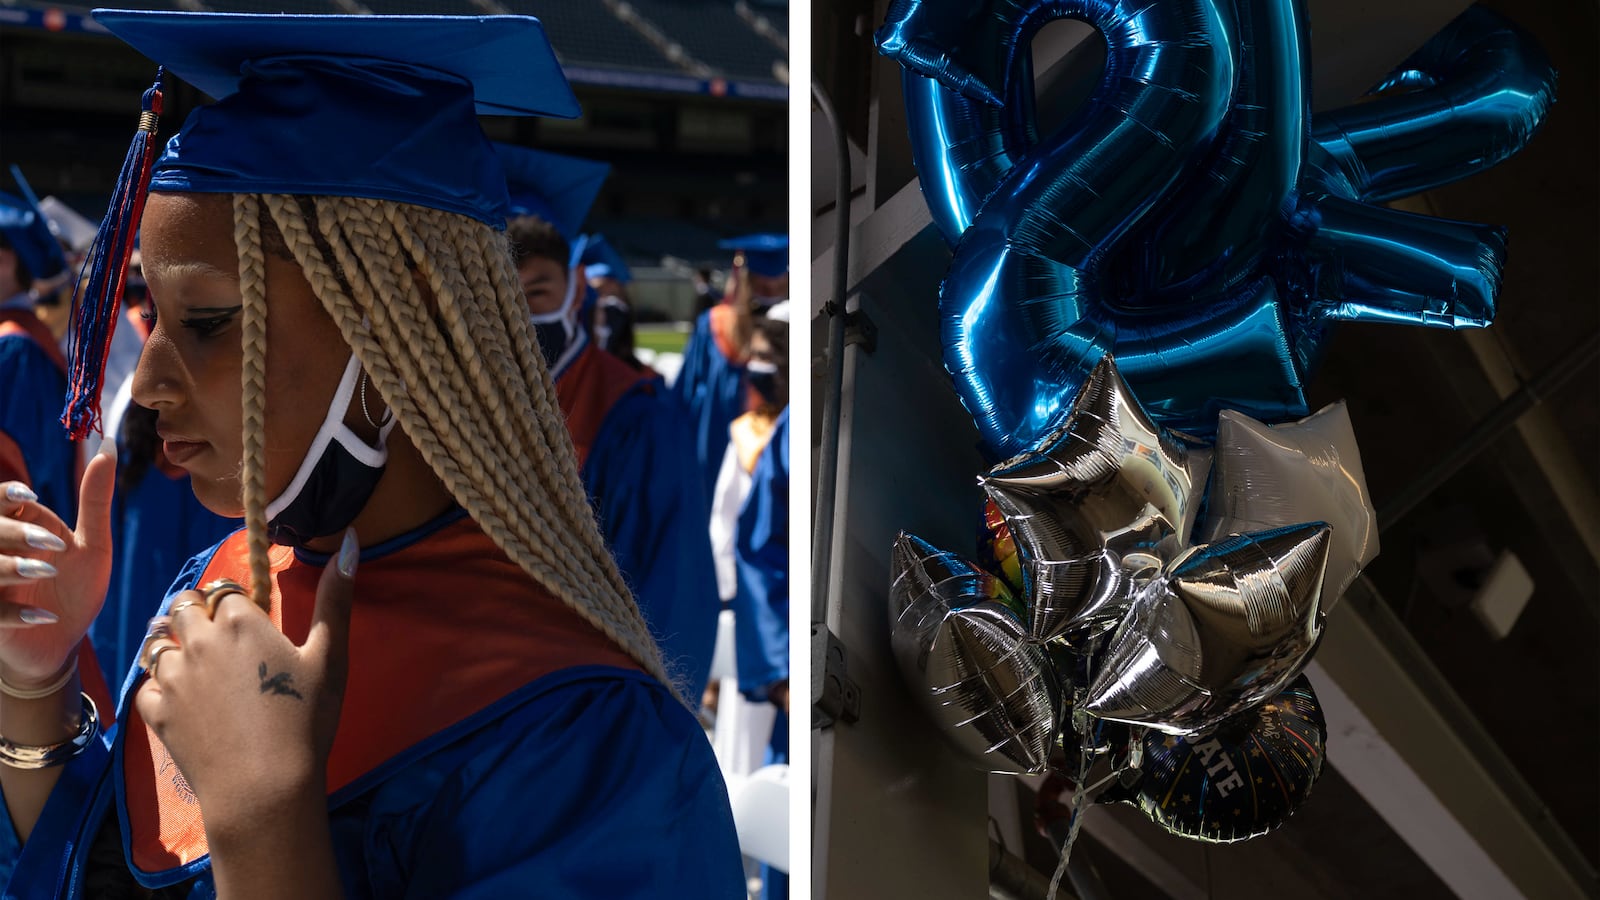 (Left) A young woman with long braided hair wearing blue and orange graduation regalia adjusts her cap. (Right) Blue and silver decorative balloons for the class of 2021 hang in the air.